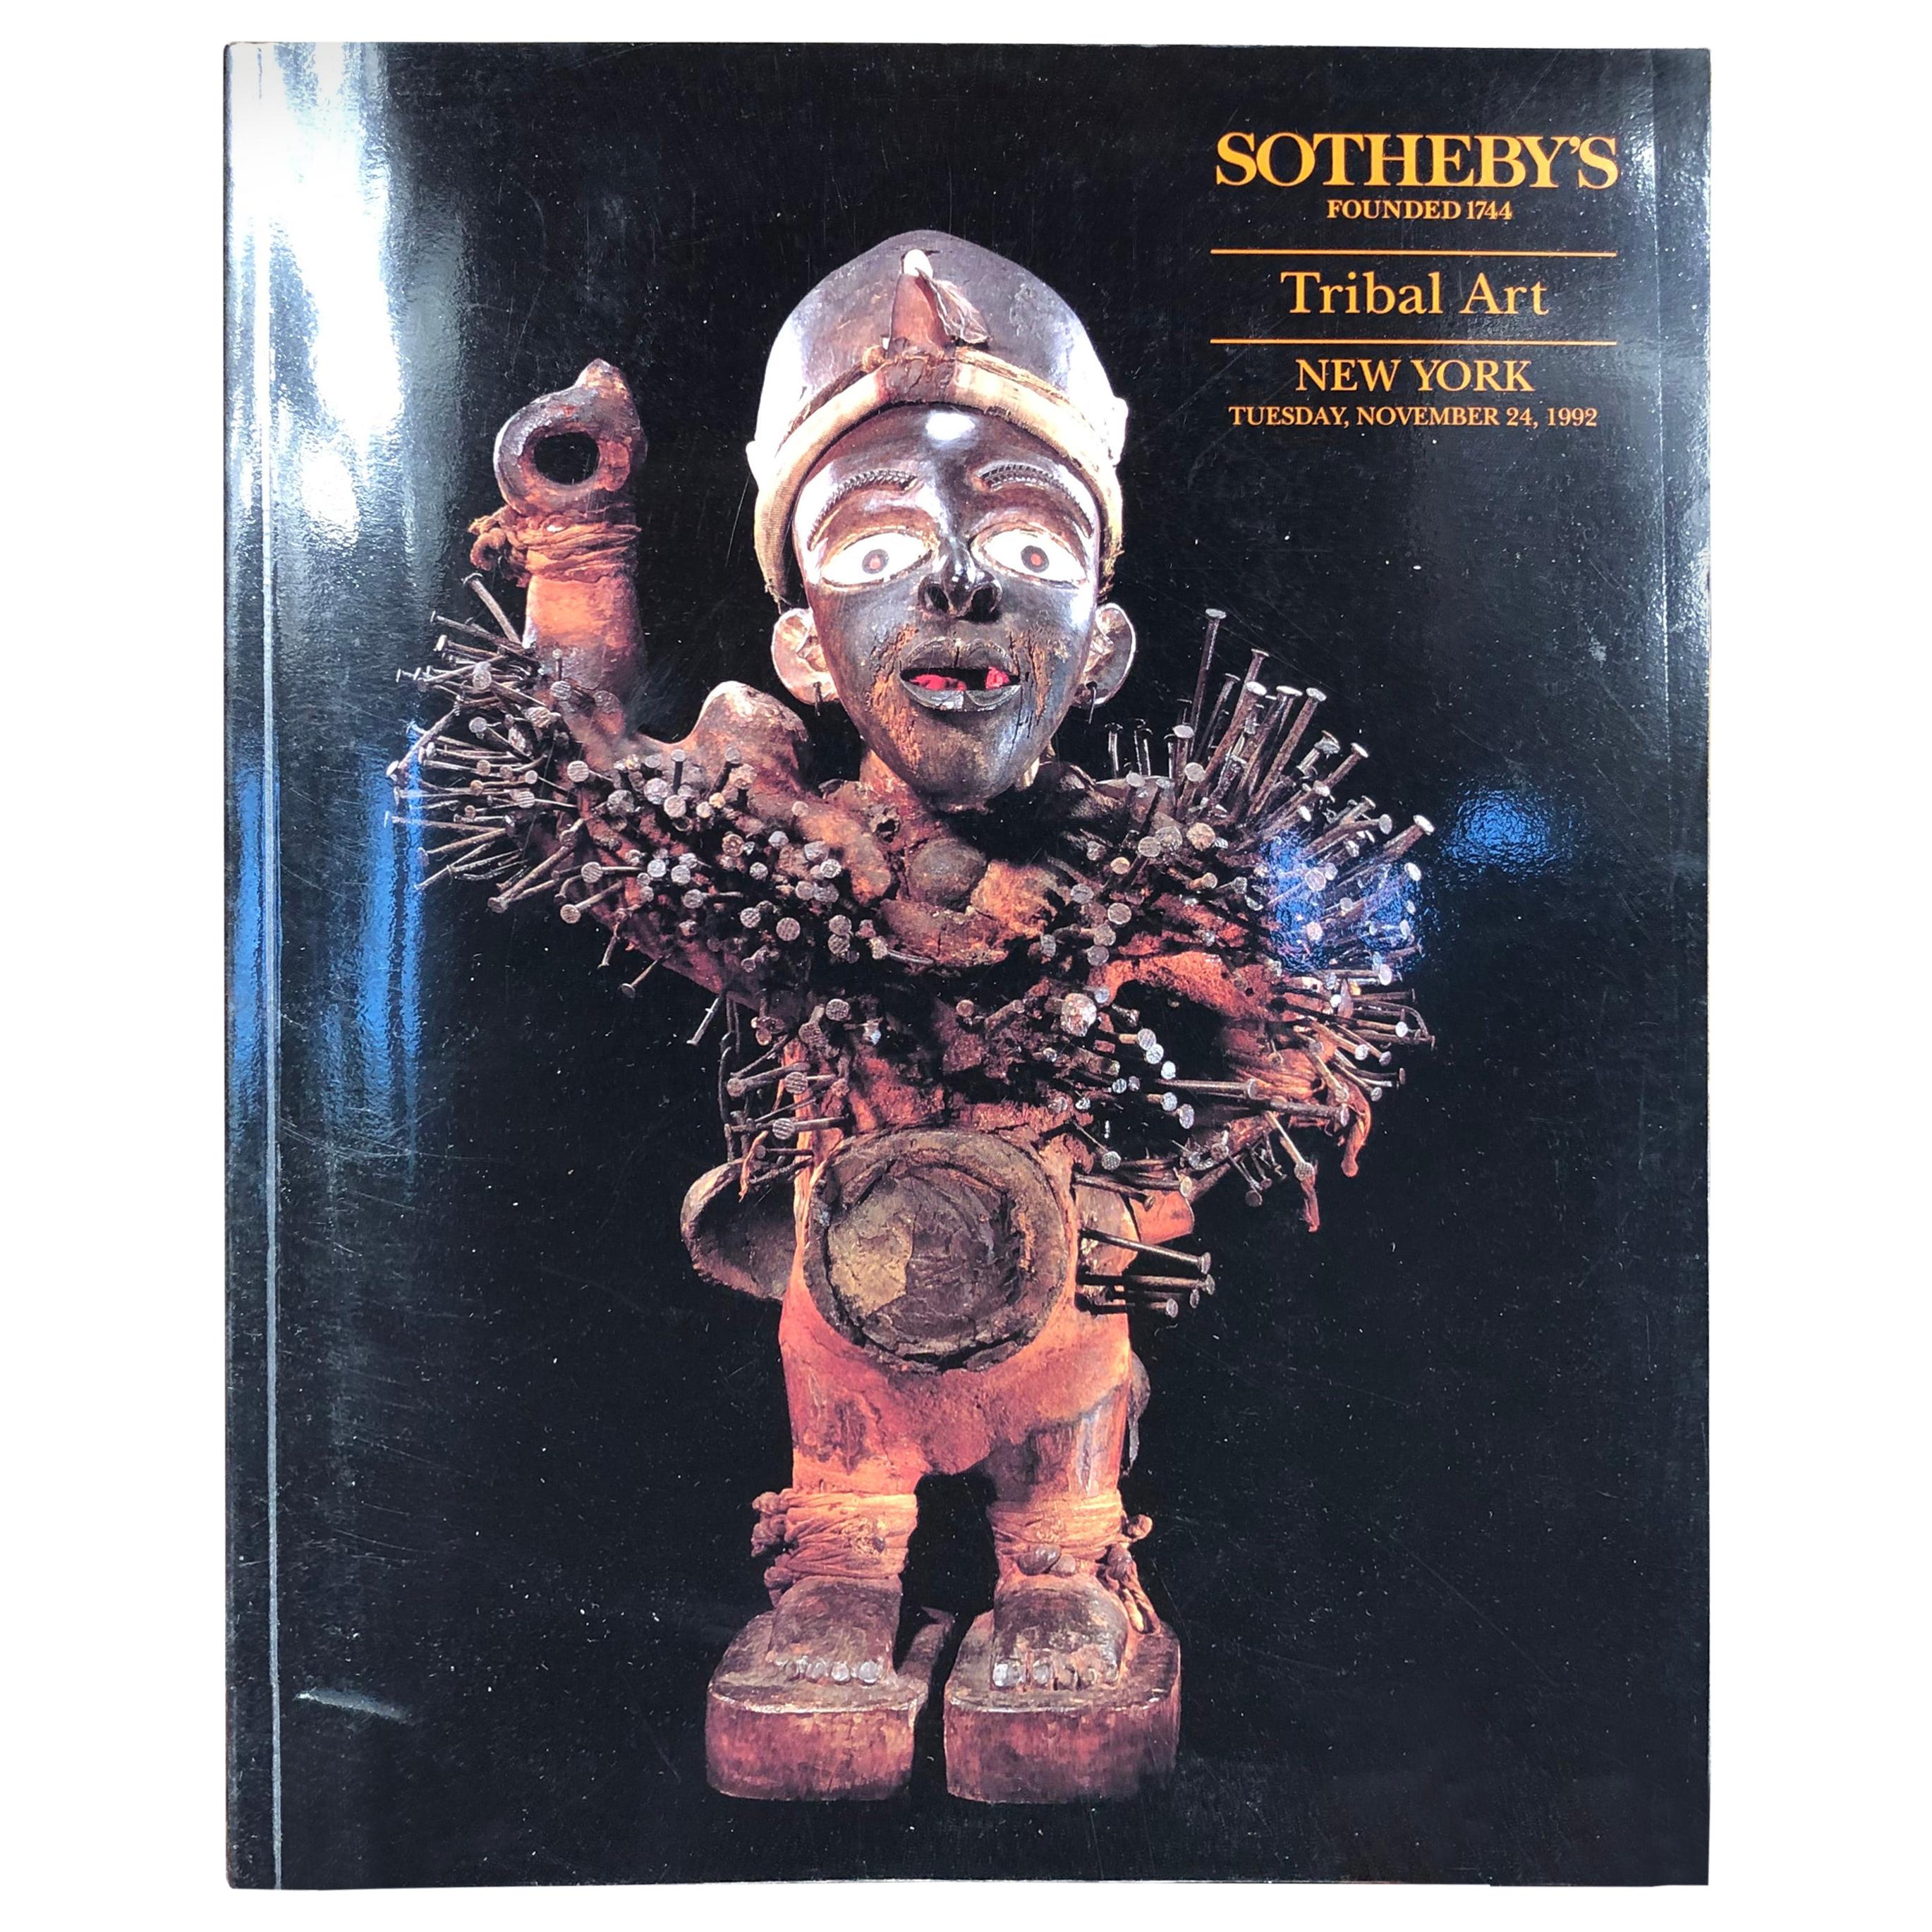 20 "Sotheby" Auction Catalogs African Oceania Collectors Research, 1991-2001